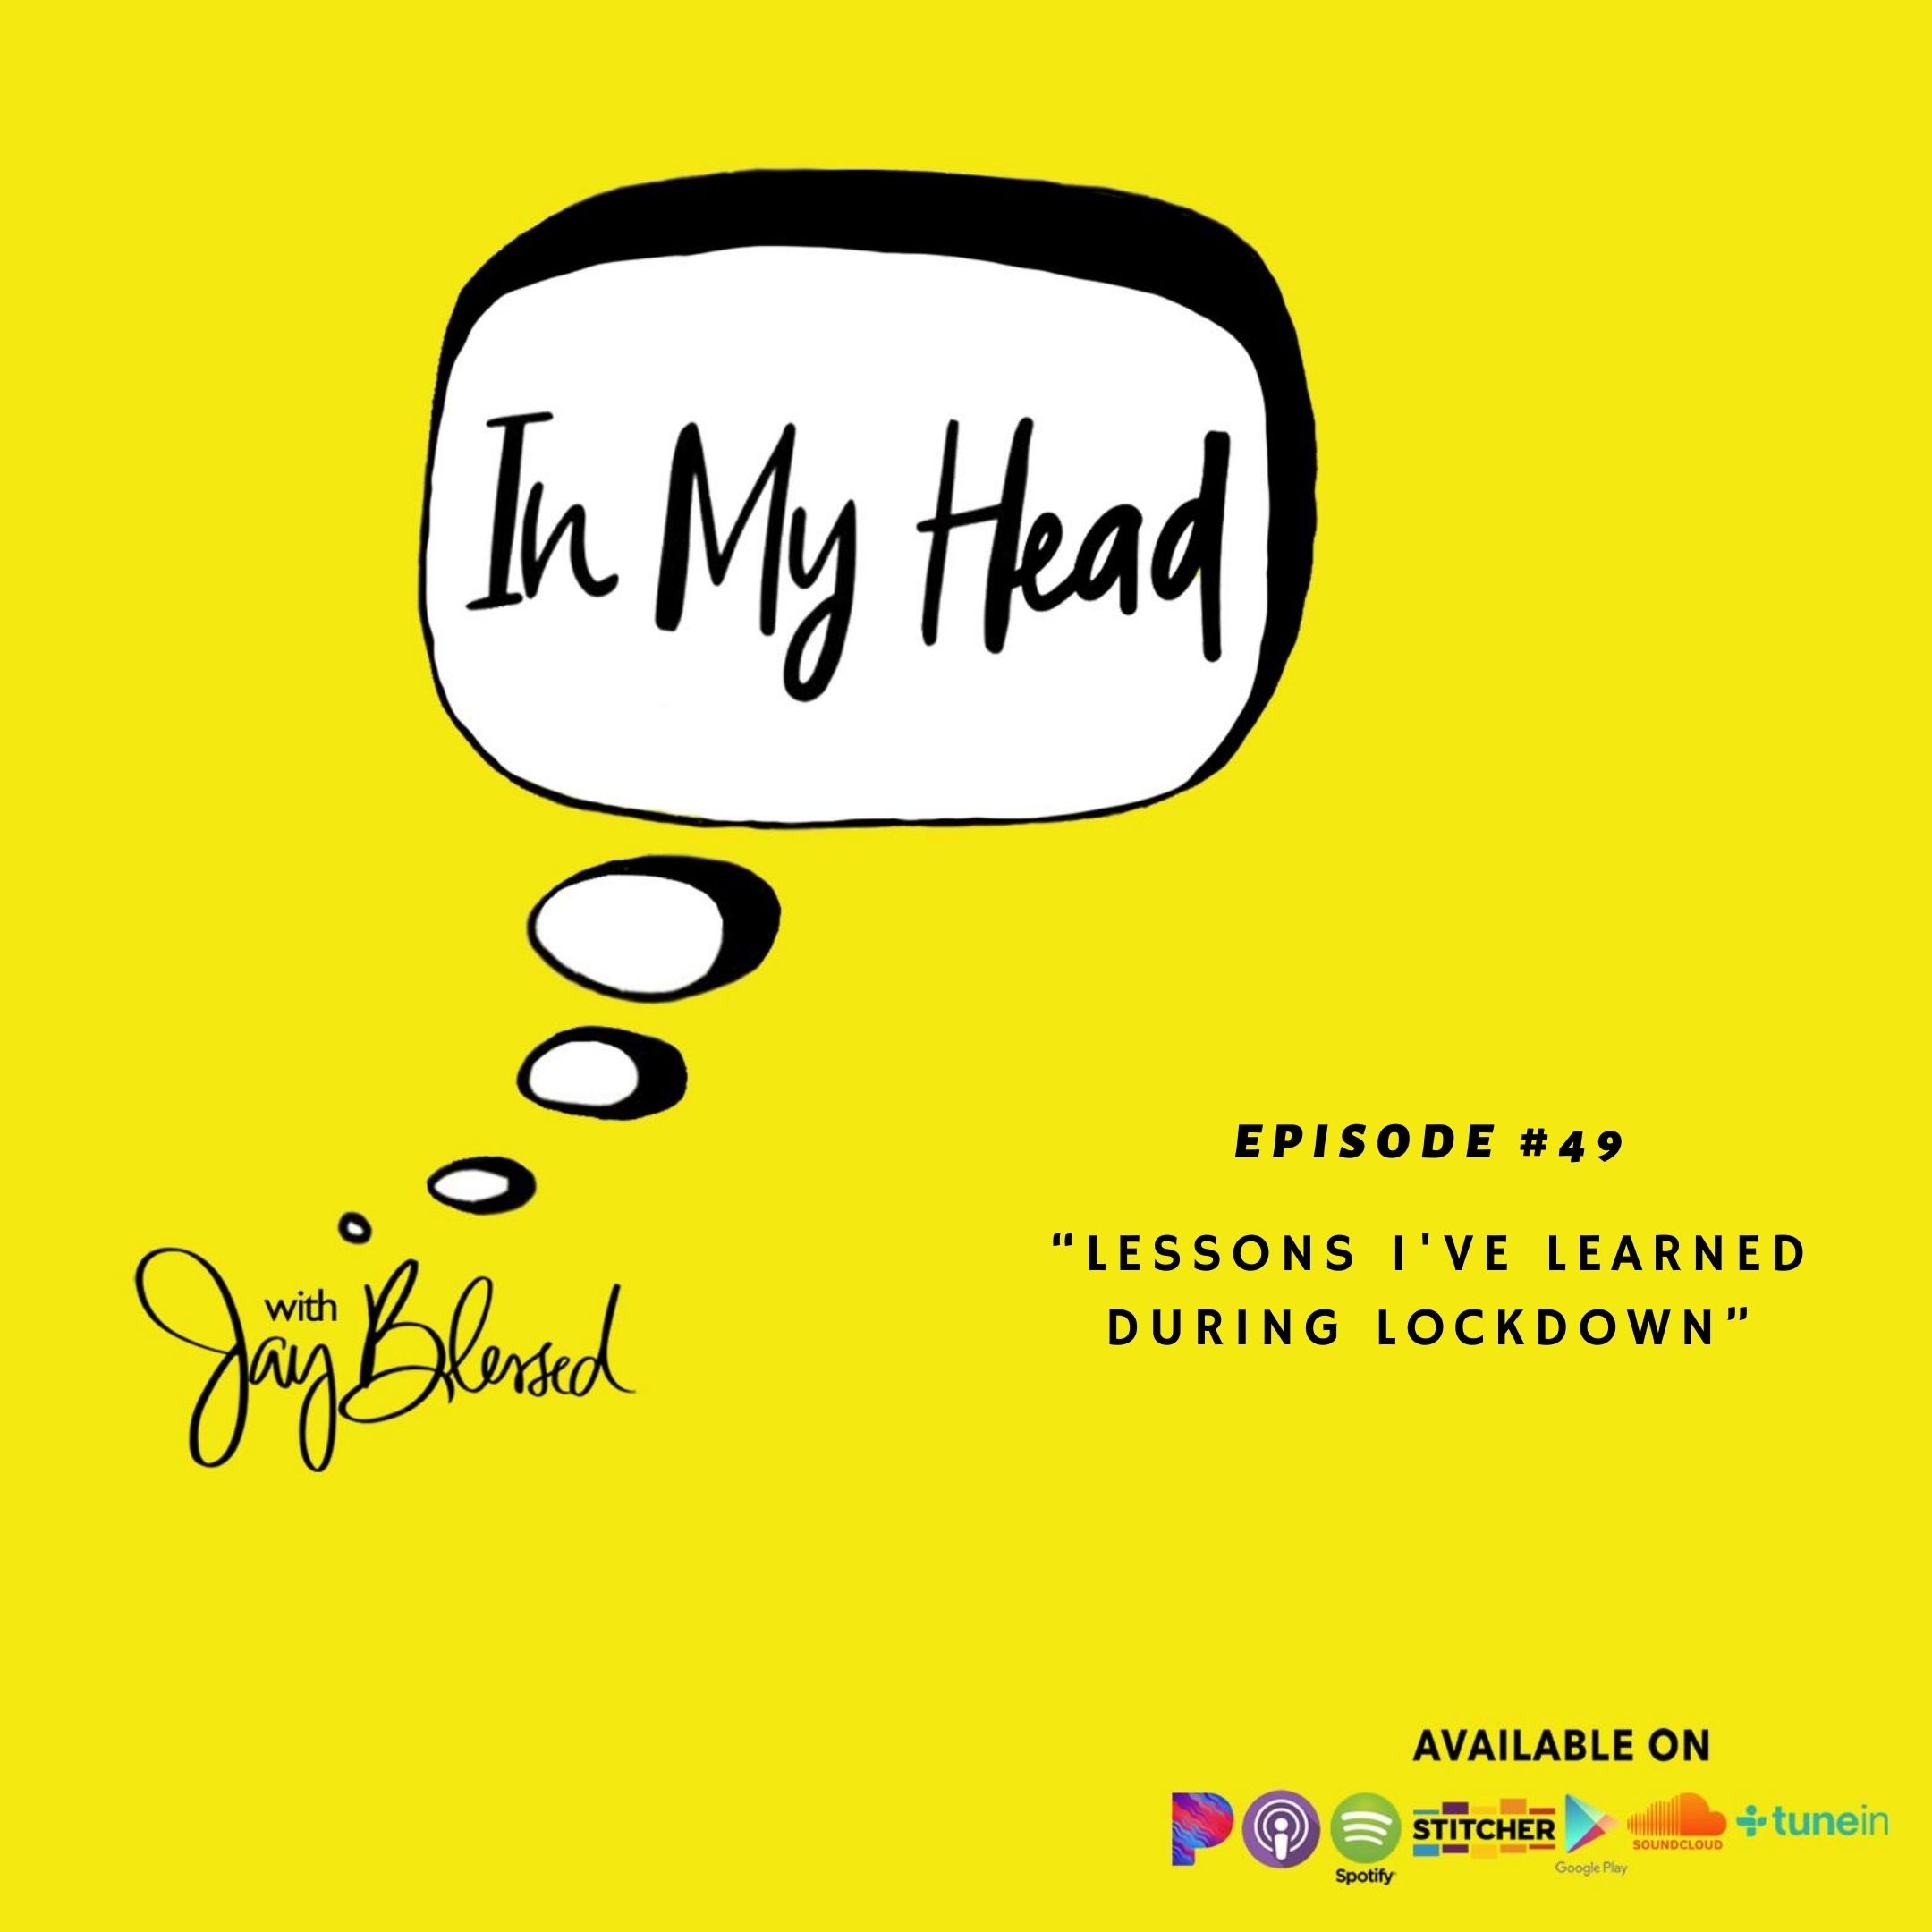 IN MY HEAD with Jay Blessed Ep. 49 features the Caribbean podcaster in a solo episode discussing the lessons she's learned during lockdown.